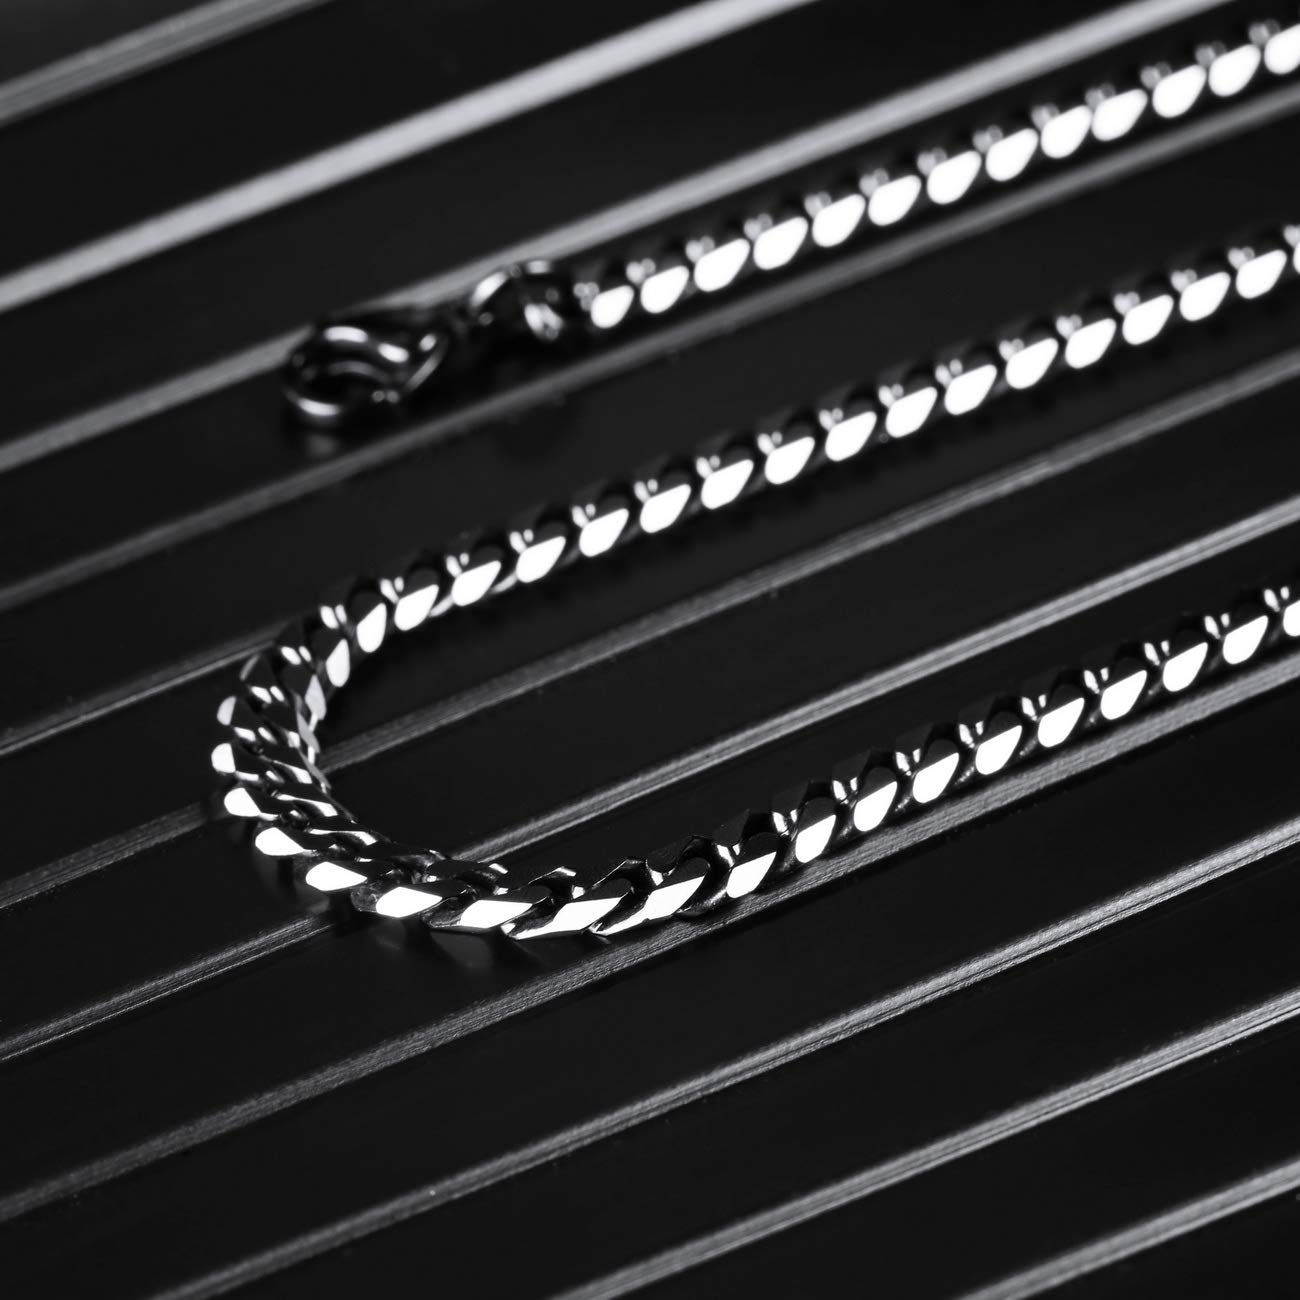 MOWOM Black Chain Necklace for Men Women Water Resistent 316L Stainless Steel Big Thick Cuban Link Chains Plated & Brushed finish Silver Color with Gift Box (3.5-8 MM Wide, 14-36 Inches Long)